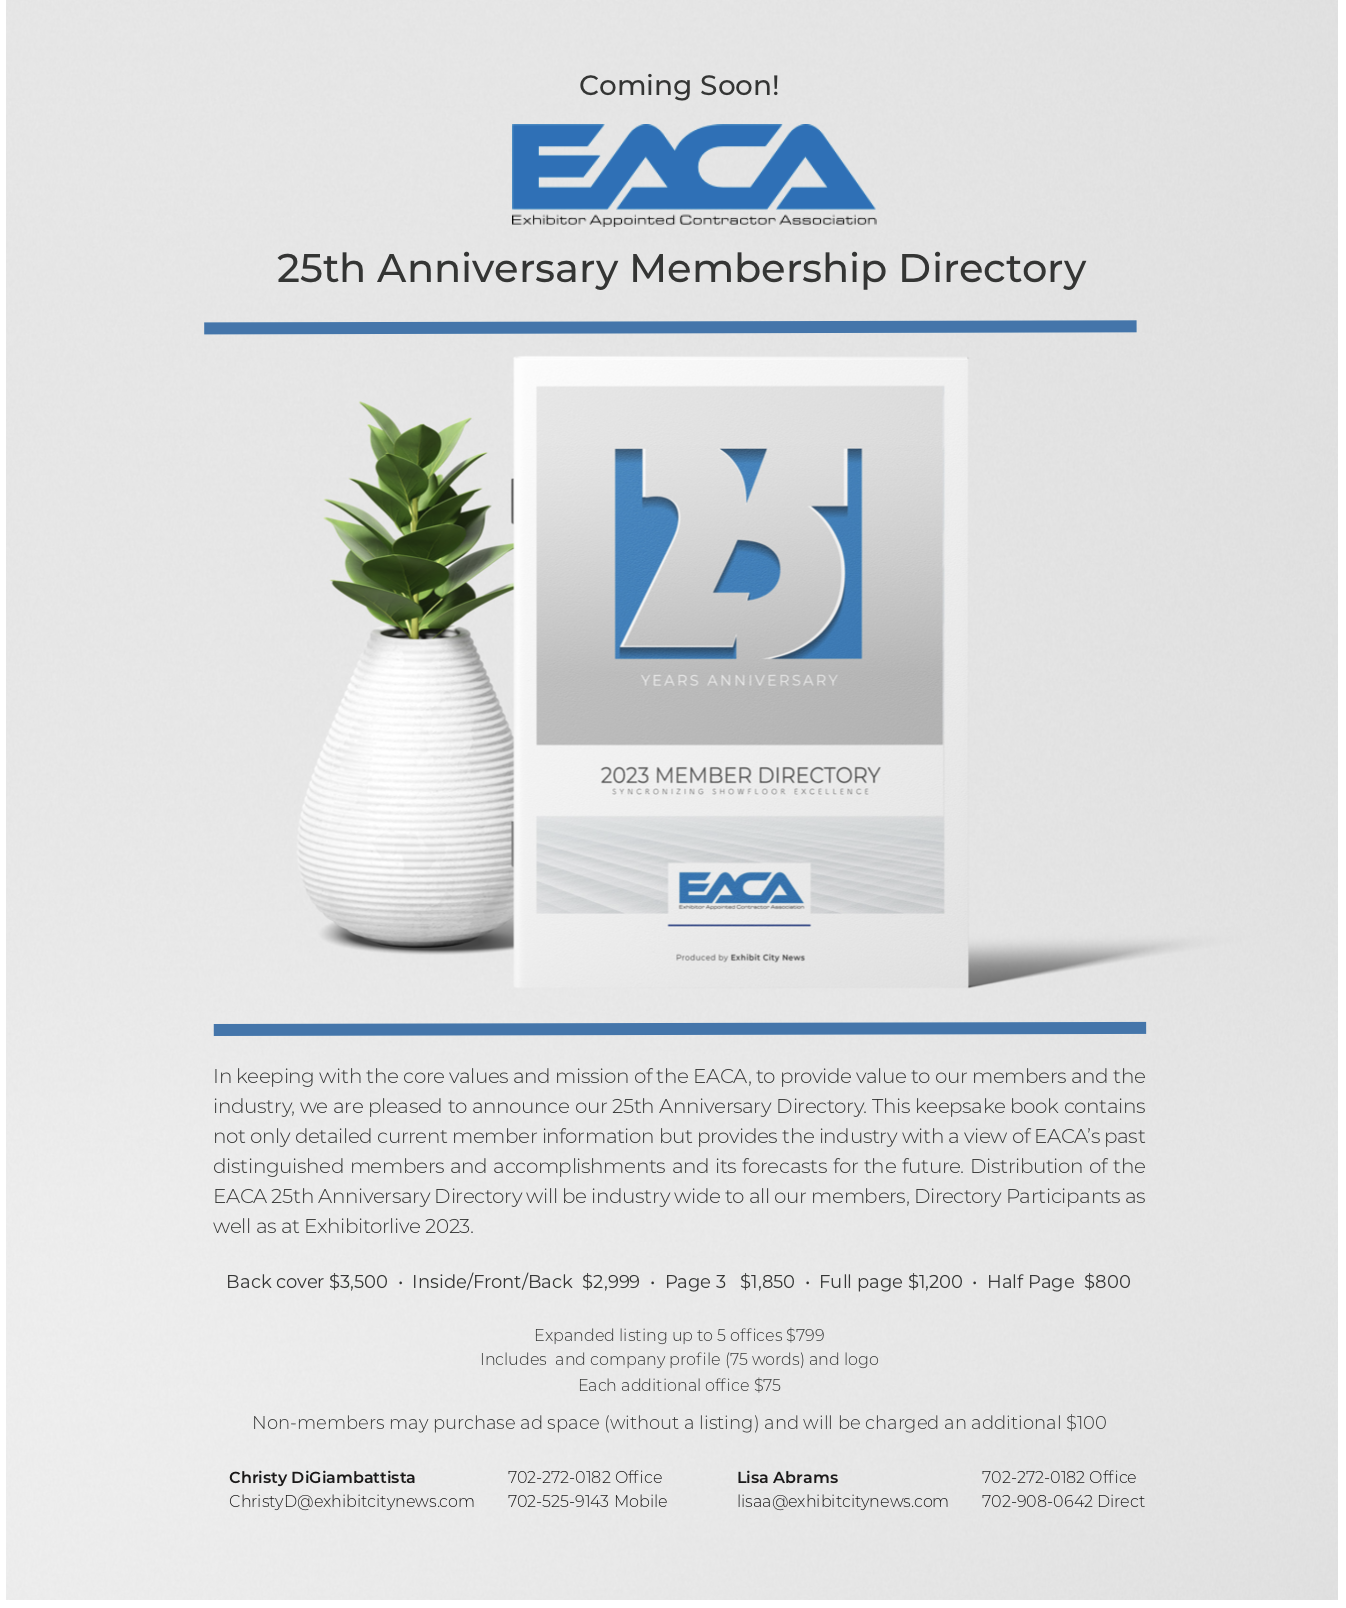 EACA Home Exhibitor Appointed Contractor Association